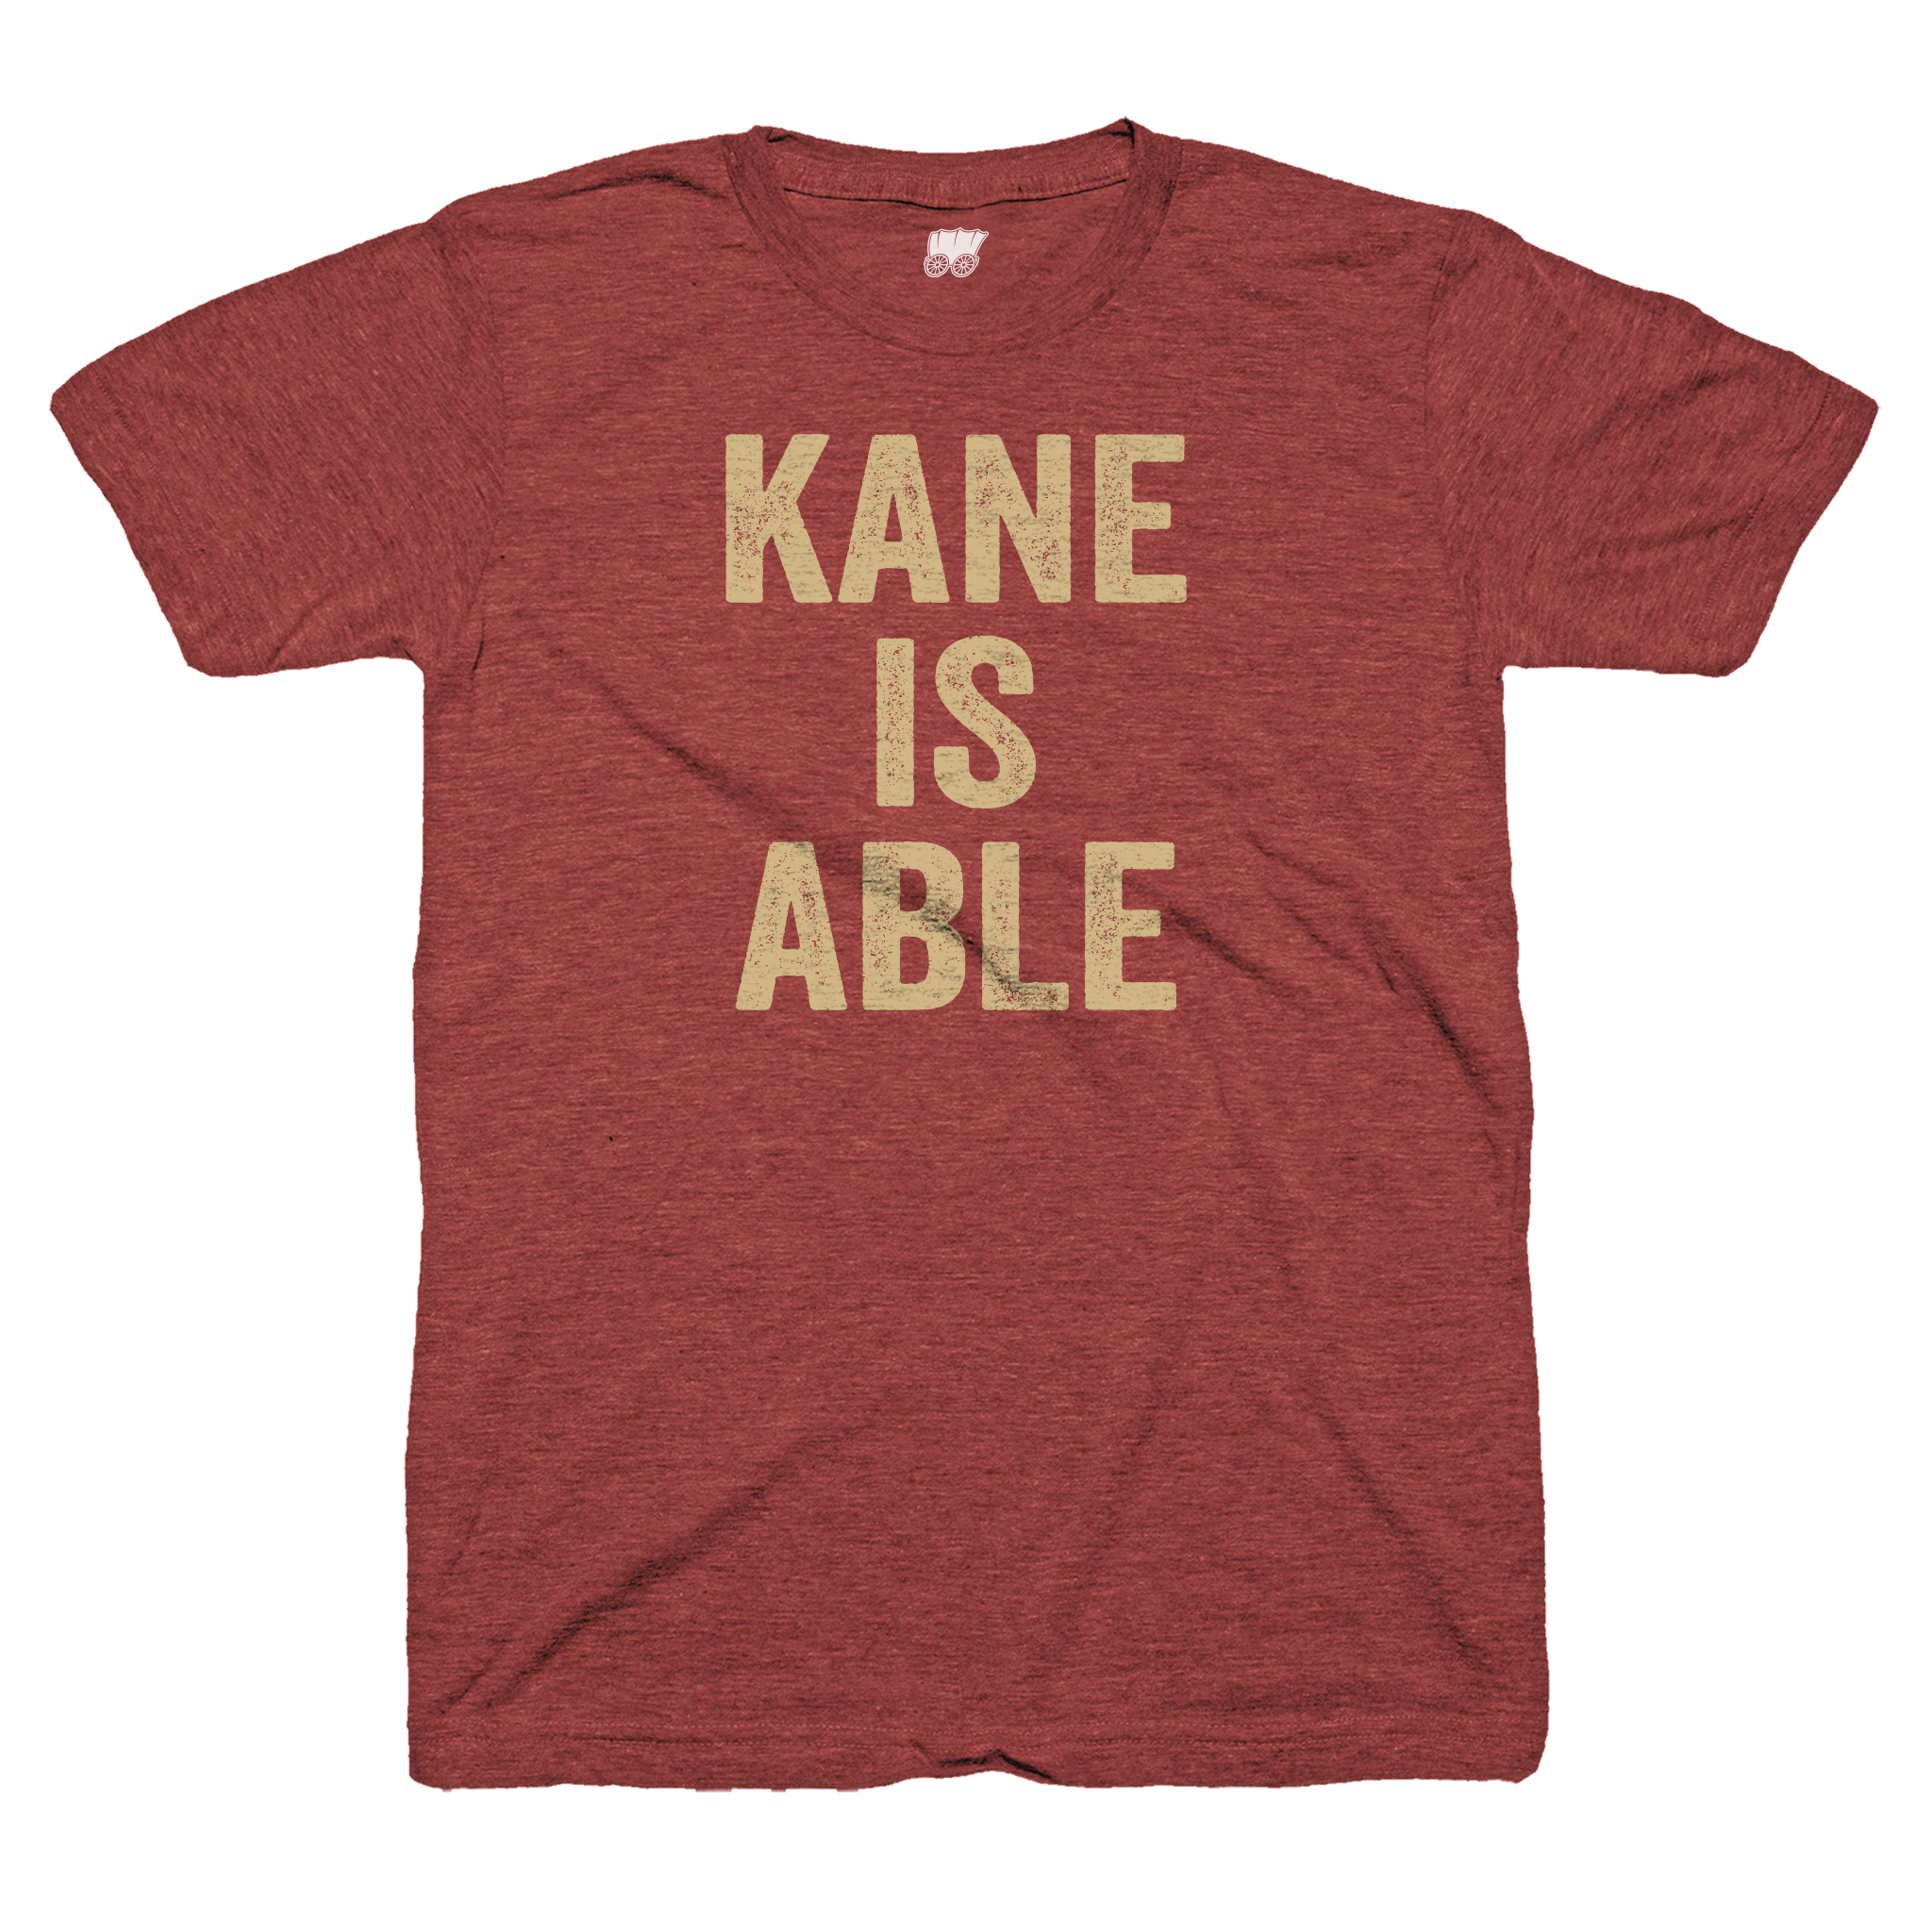 Kane_is_able_2048x.png